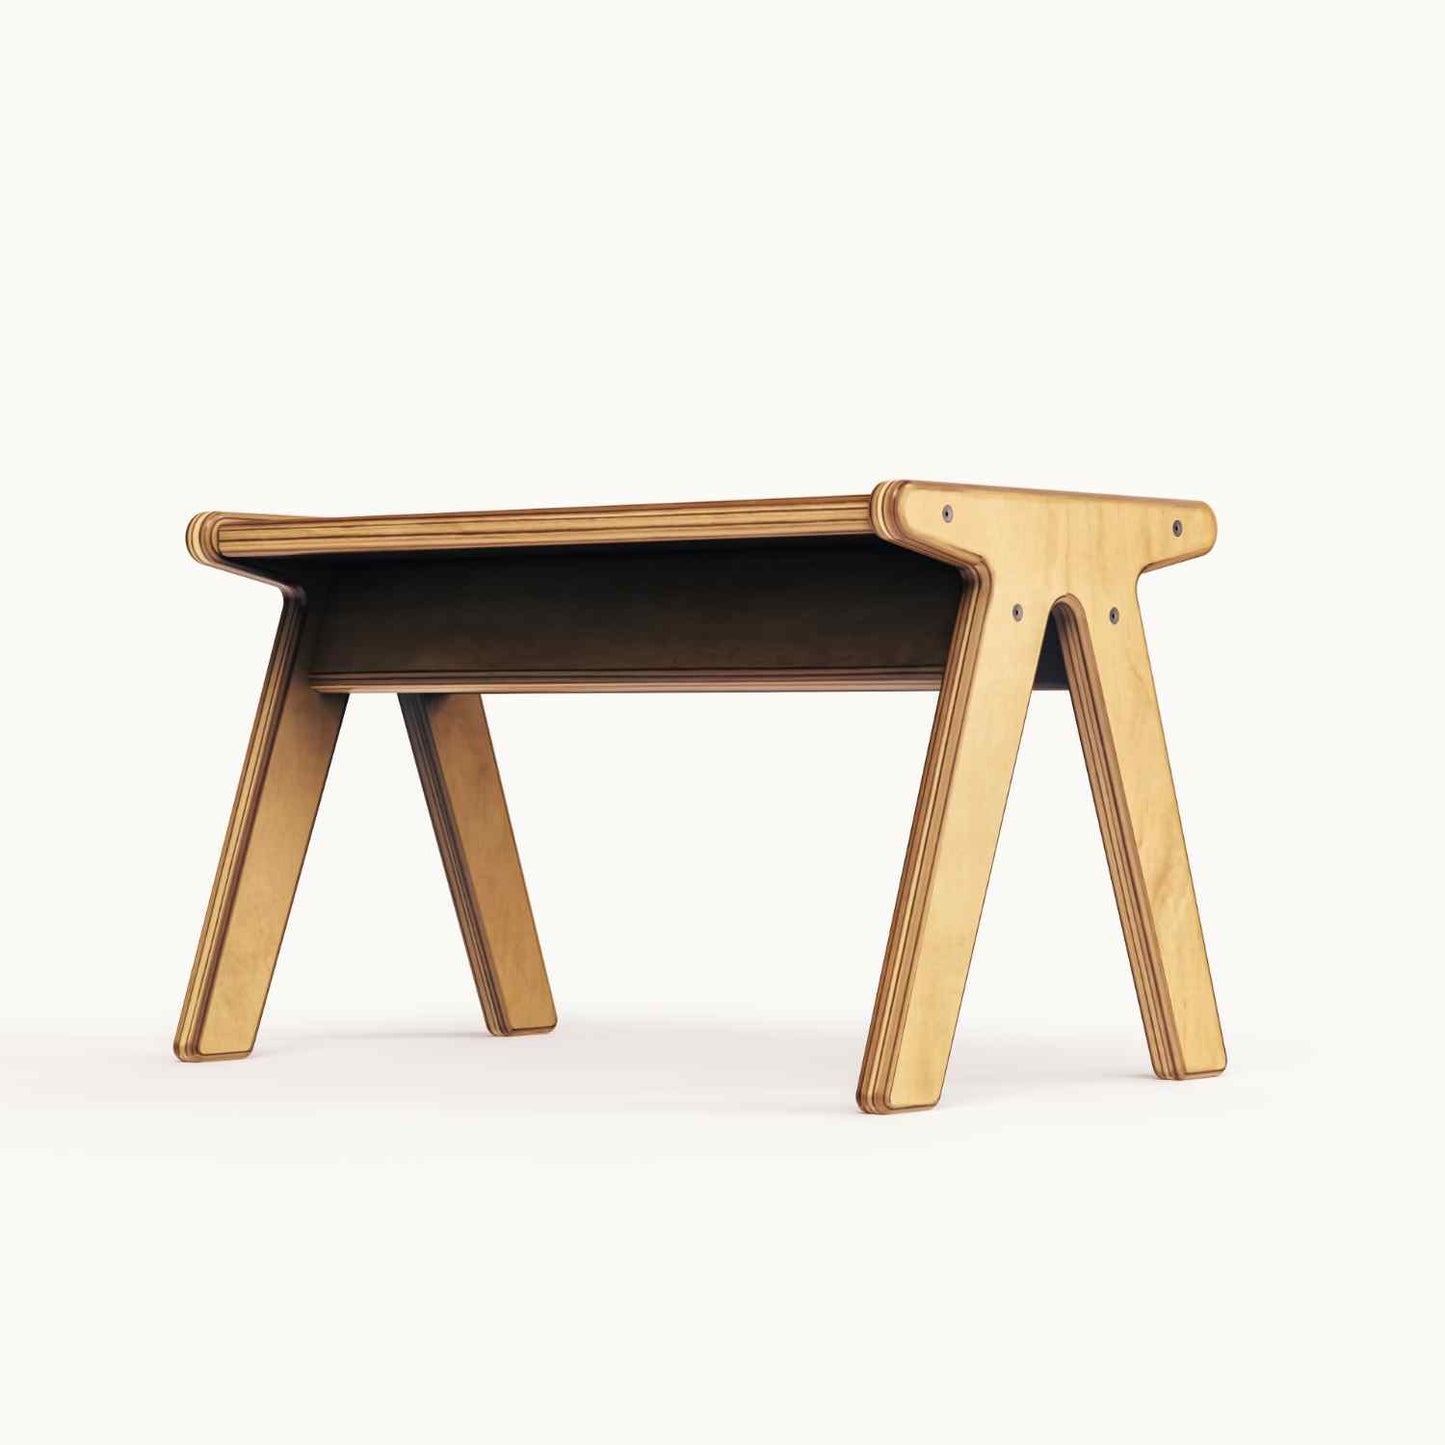 Wooden One Step Stools For Kids